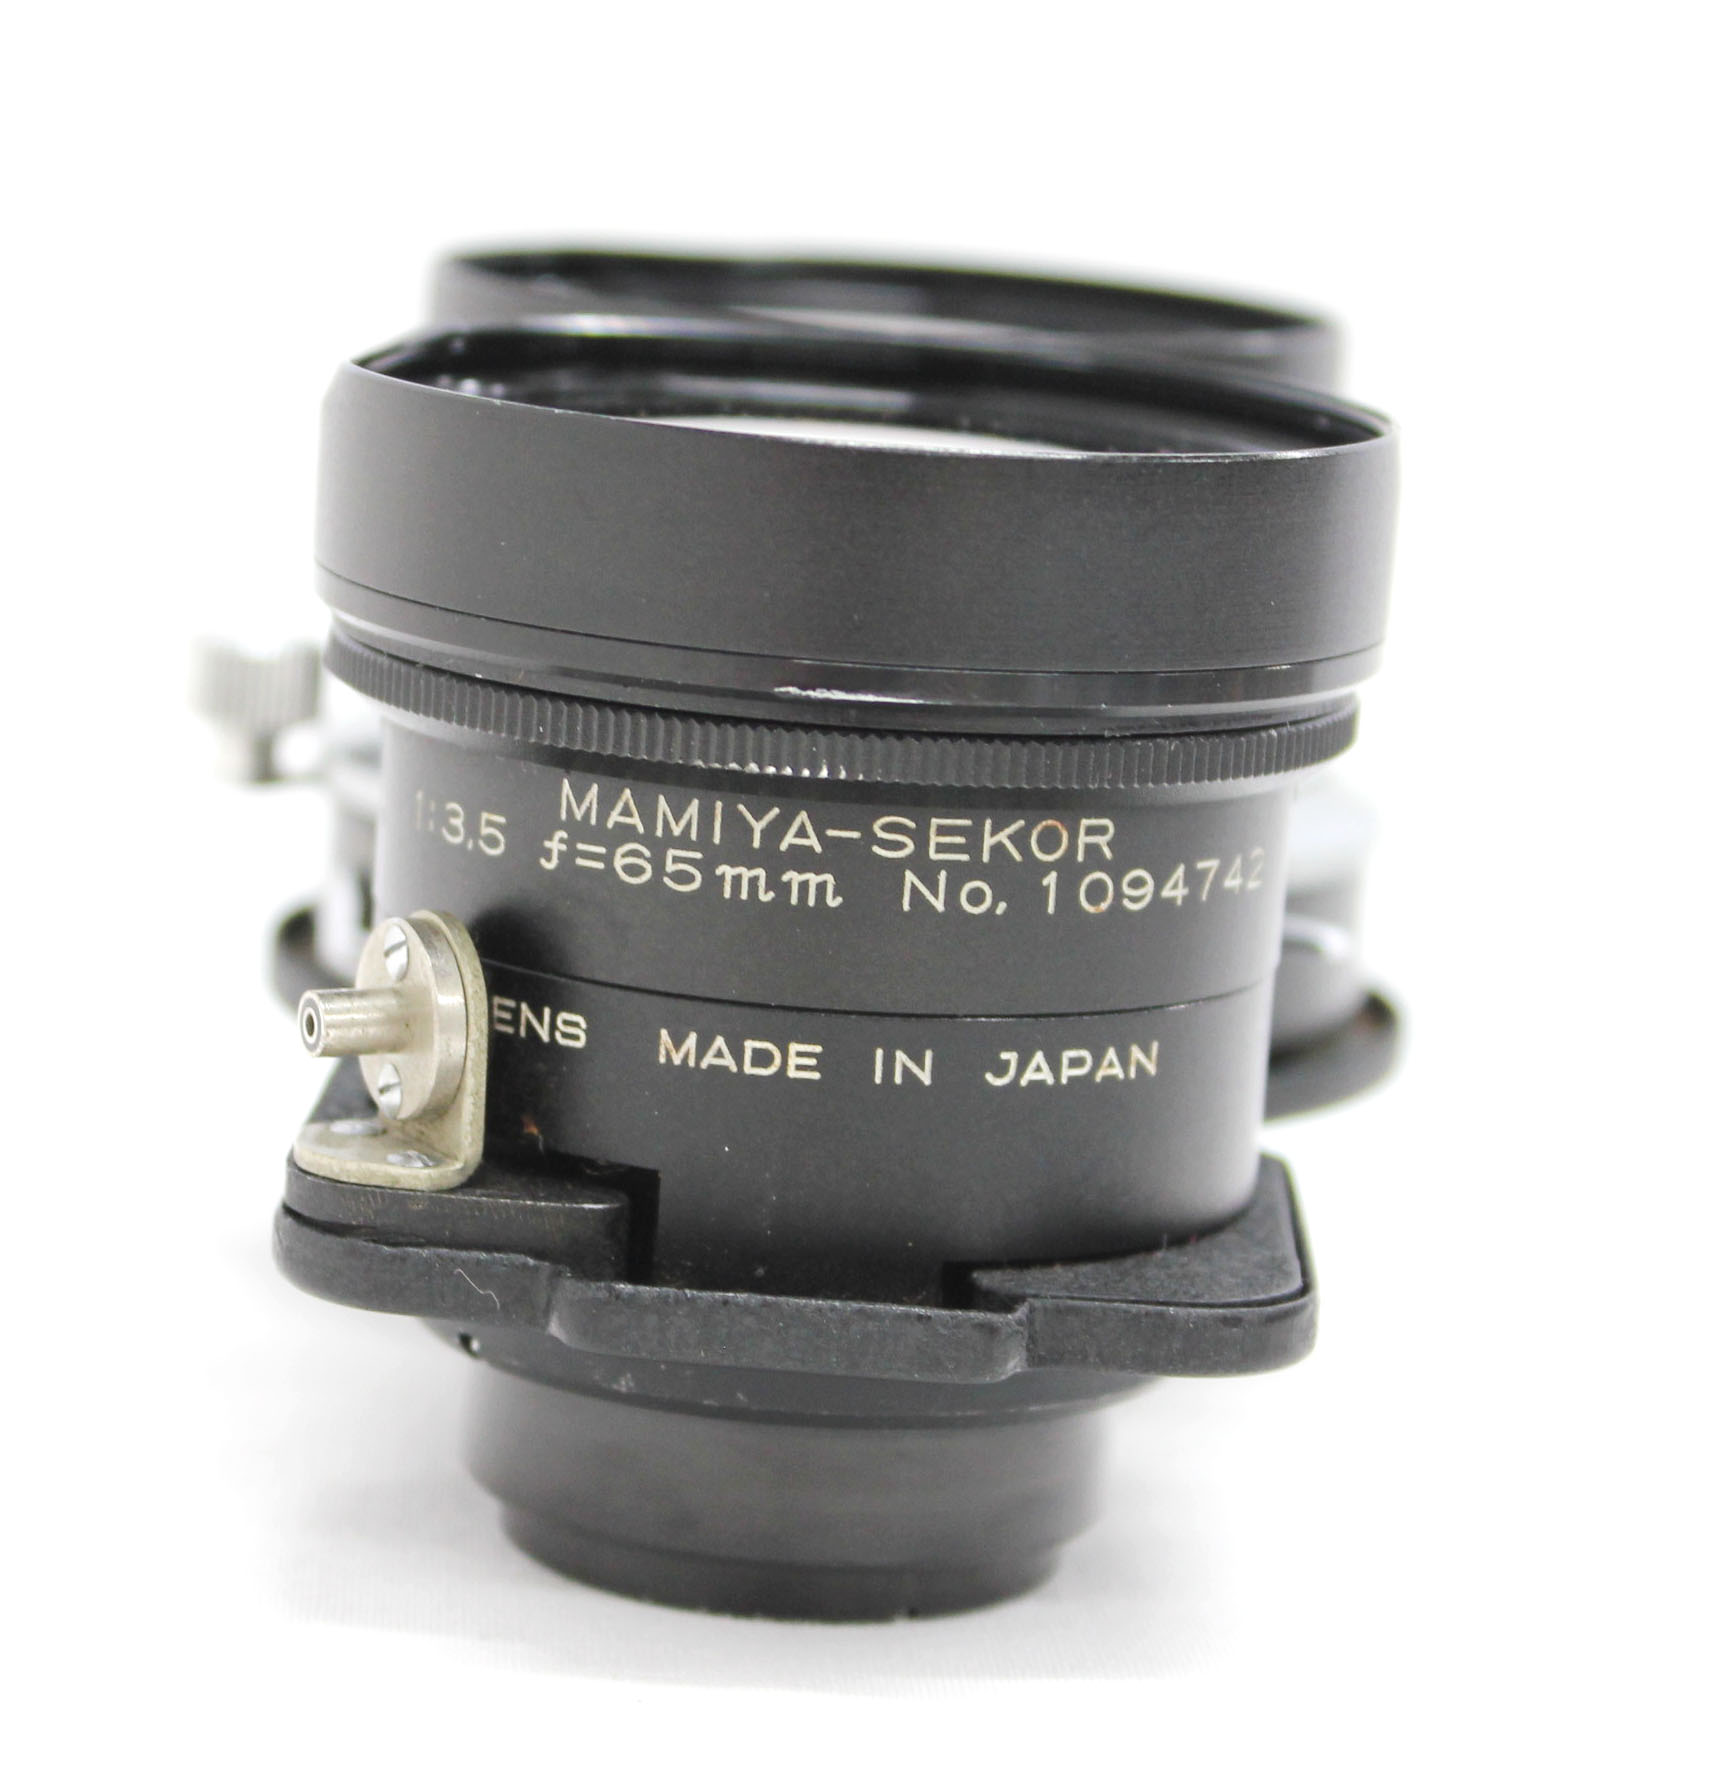 Mamiya Sekor 65mm F/3.5 TLR Lens for C3 C33 C220 C330 from Japan Photo 2